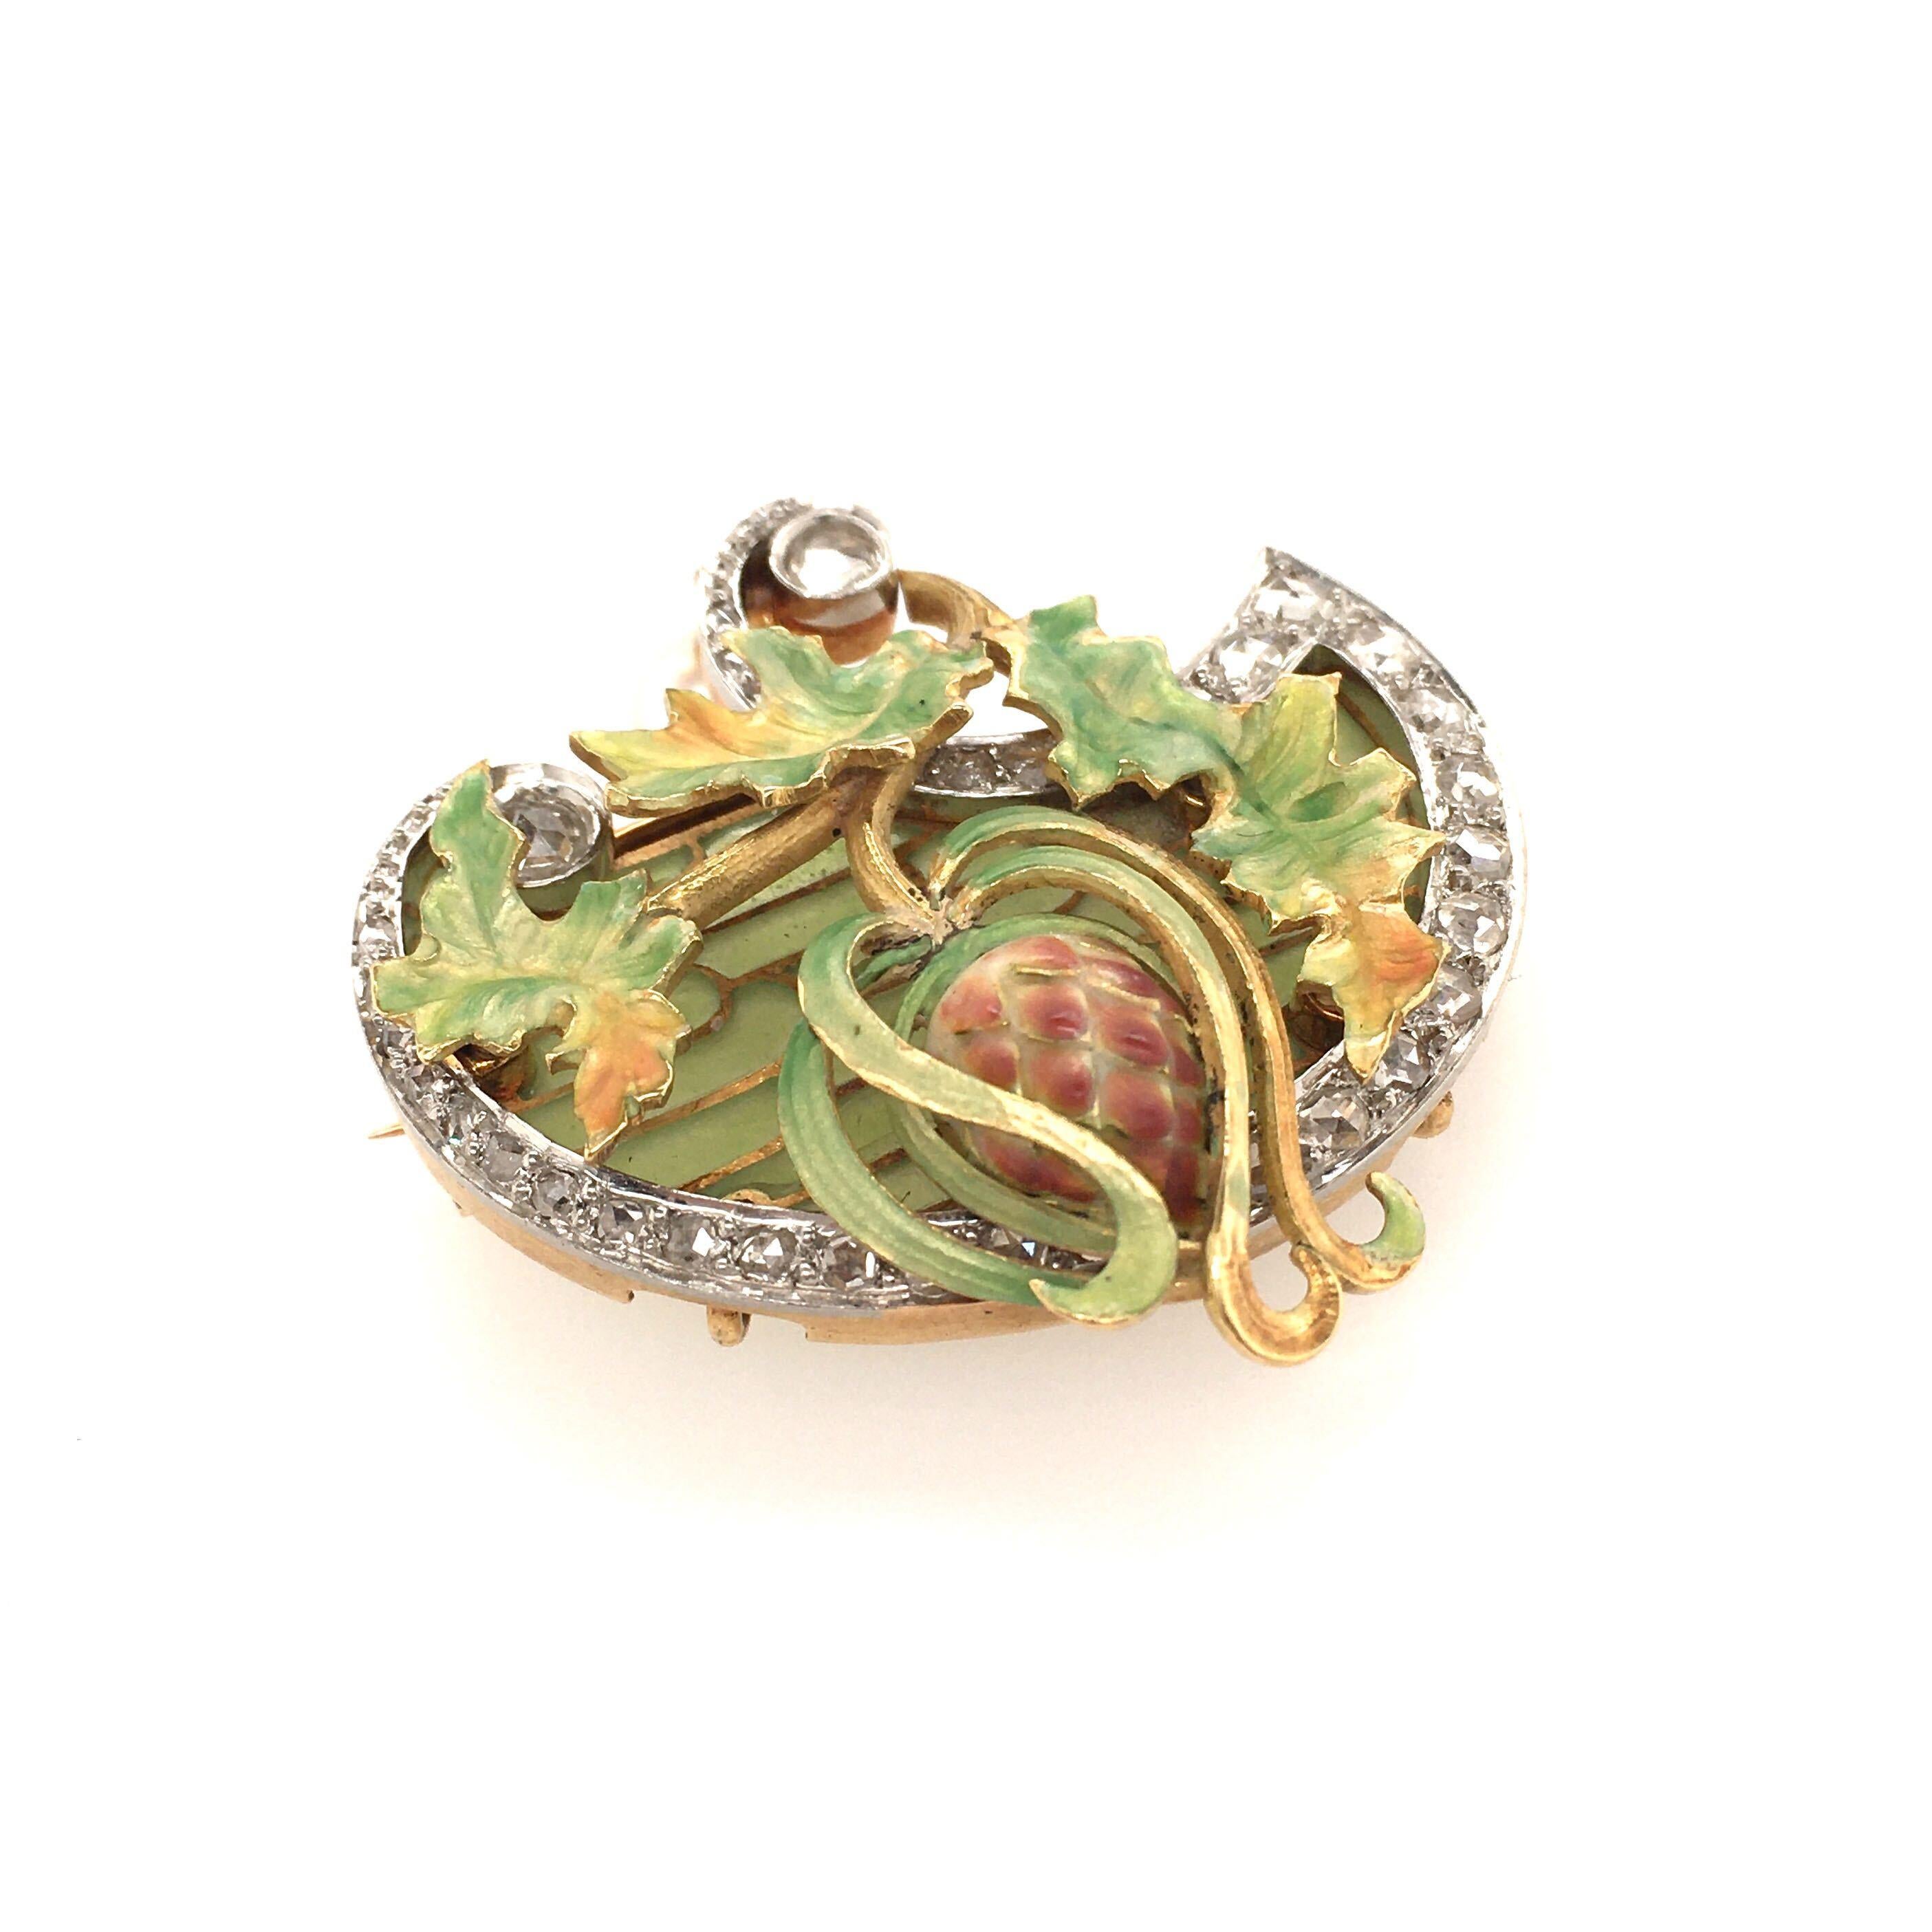 An Art Nouveau 18 karat yellow gold, enamel and pearl brooch. Circa 1900. Designed as a green, yellow and orange enamel foliate spray, against a green plique a jour background, suspending a creamy white drop shaped pearl, measuring approximately